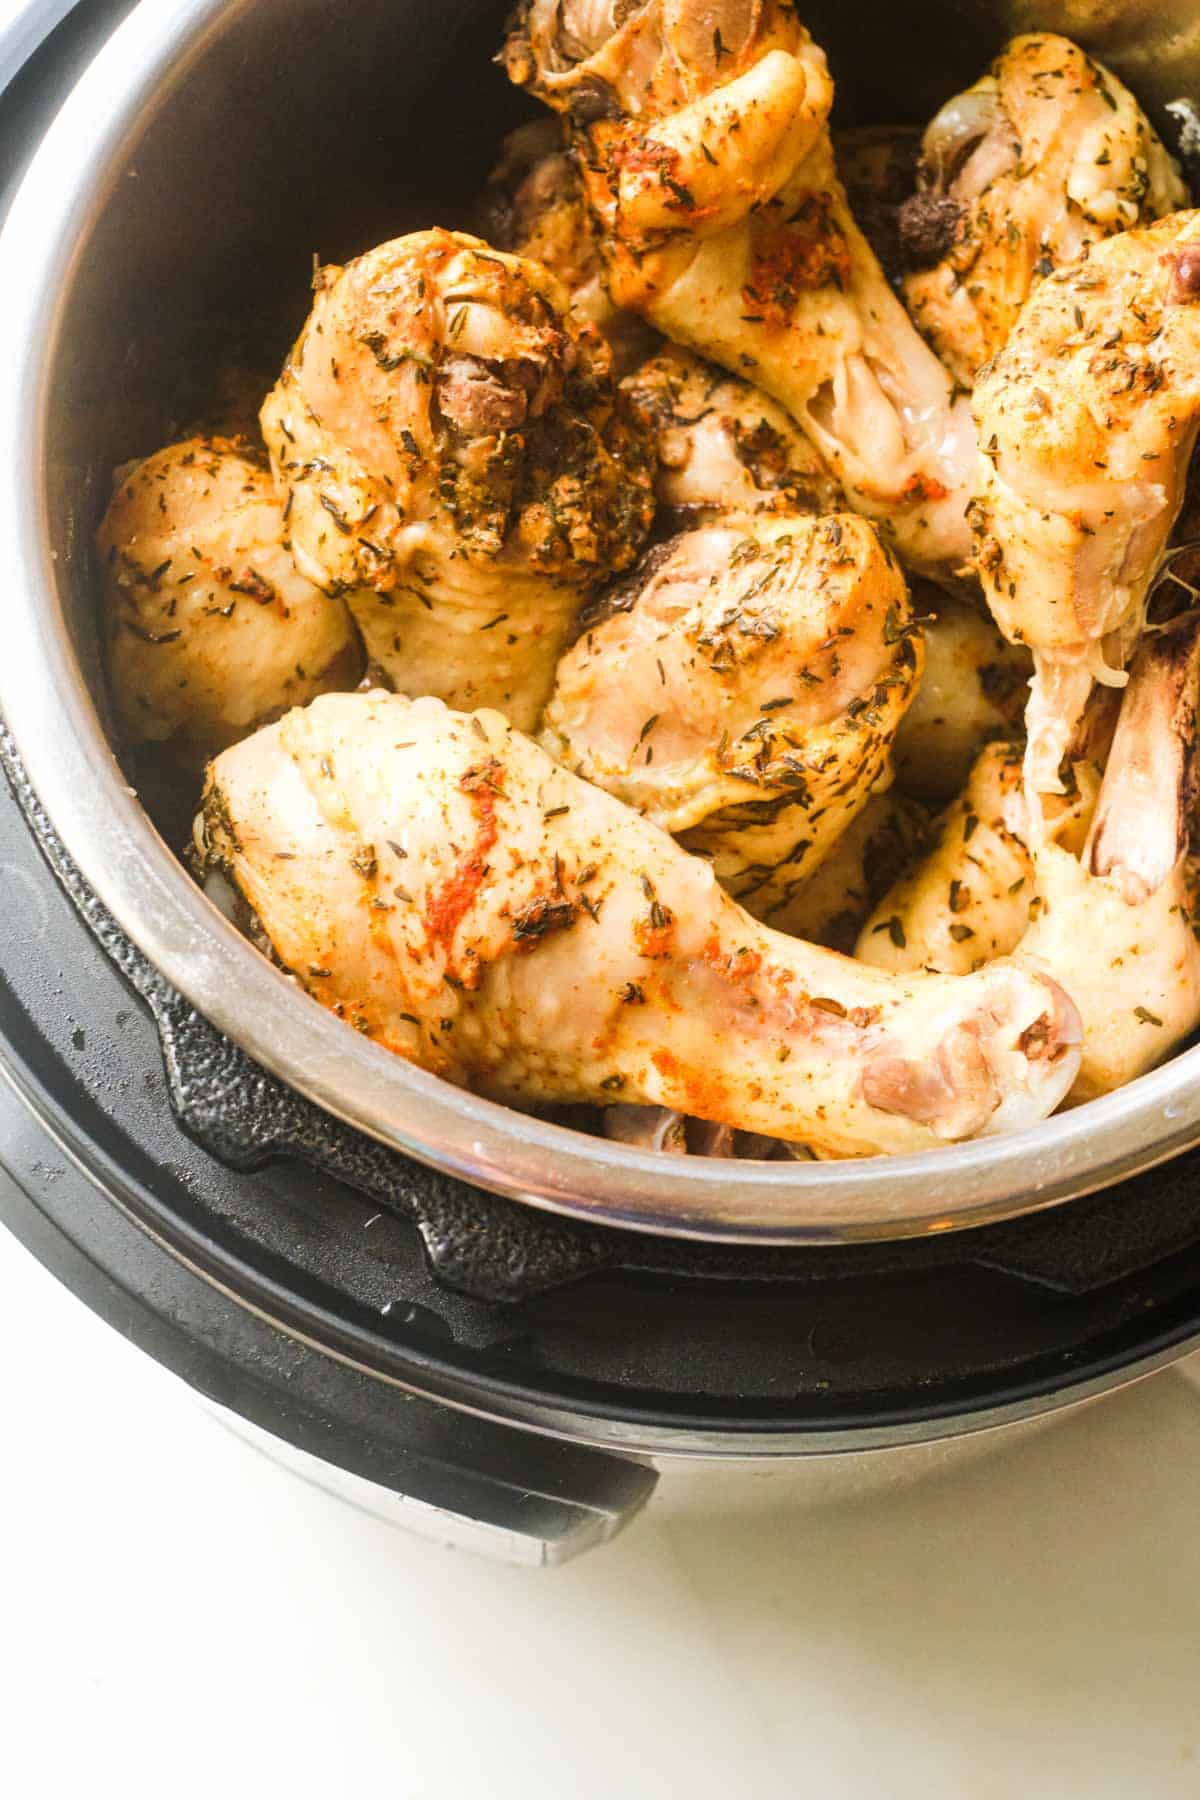 the cooked instant pot chicken drumsticks inside the instant pot